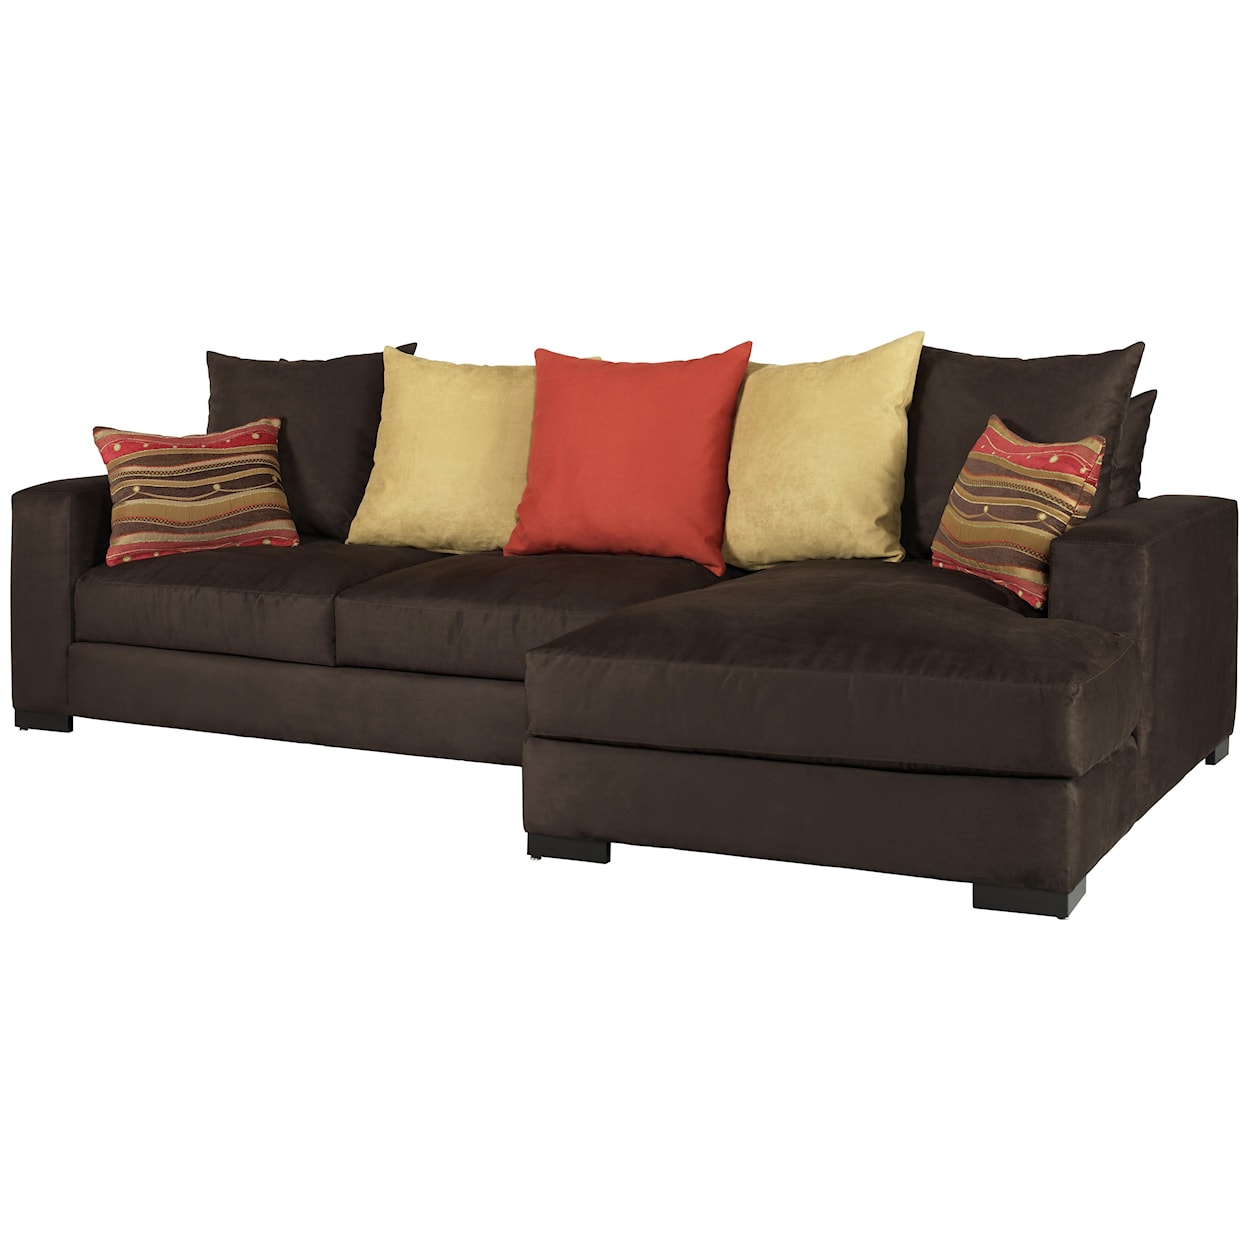 Jonathan Louis Lombardy Sectional Sofa with Right Chaise